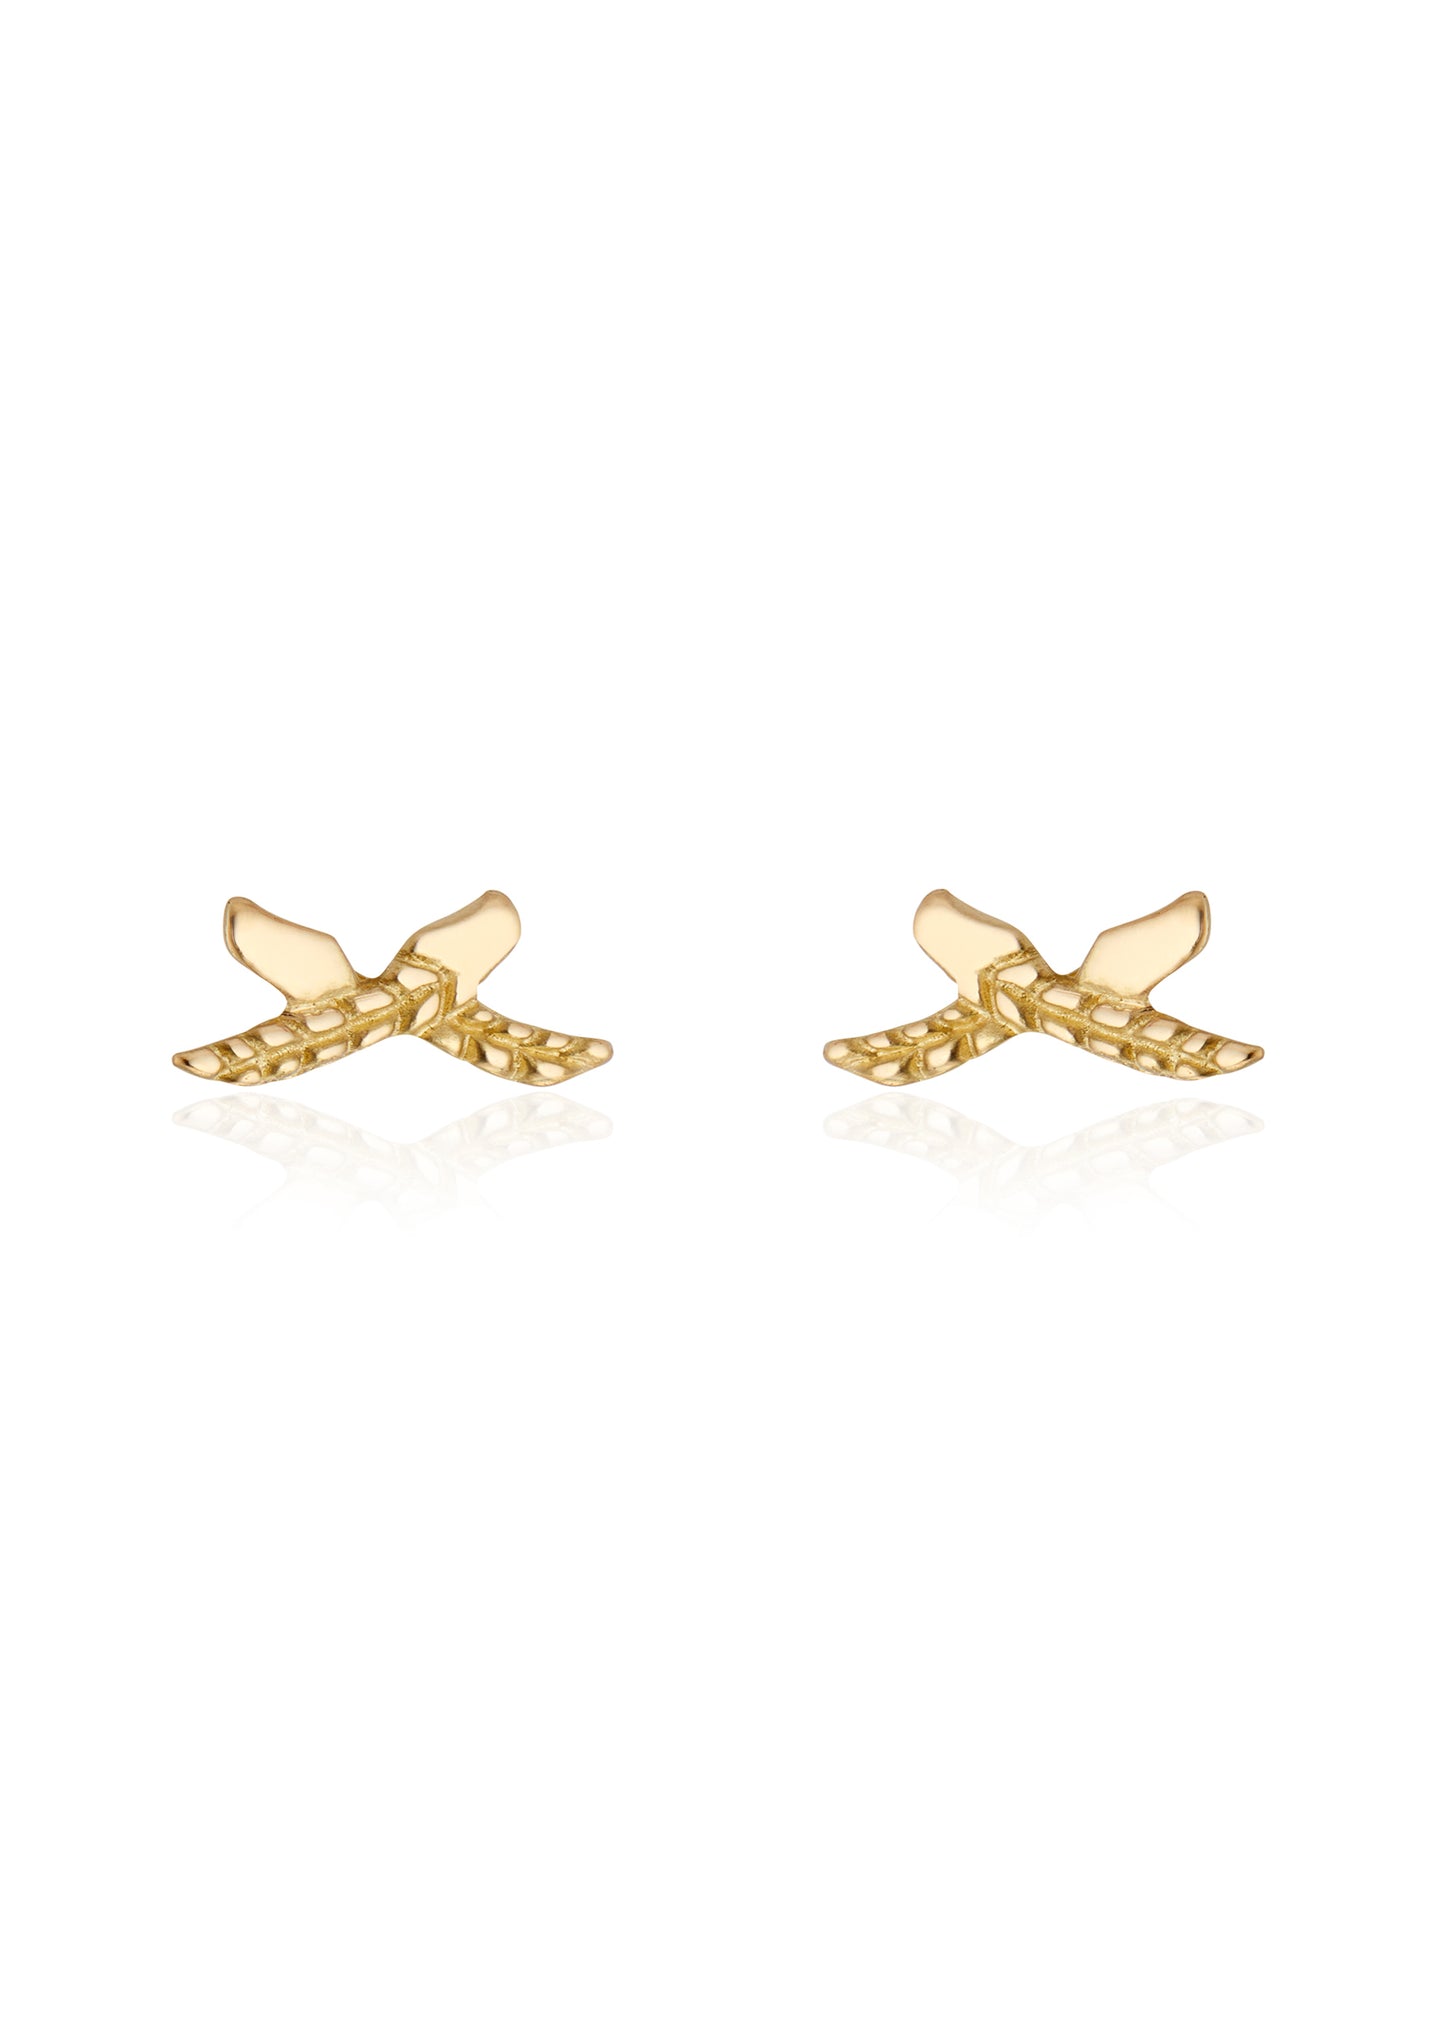 Like childhood sketches brought to life, the Byrd earring calls to mind the magic and mystery of birds in flight. Created to resemble the intricate patterns of a feather, these criss-crossed stud earrings sit delicately on the ear. 